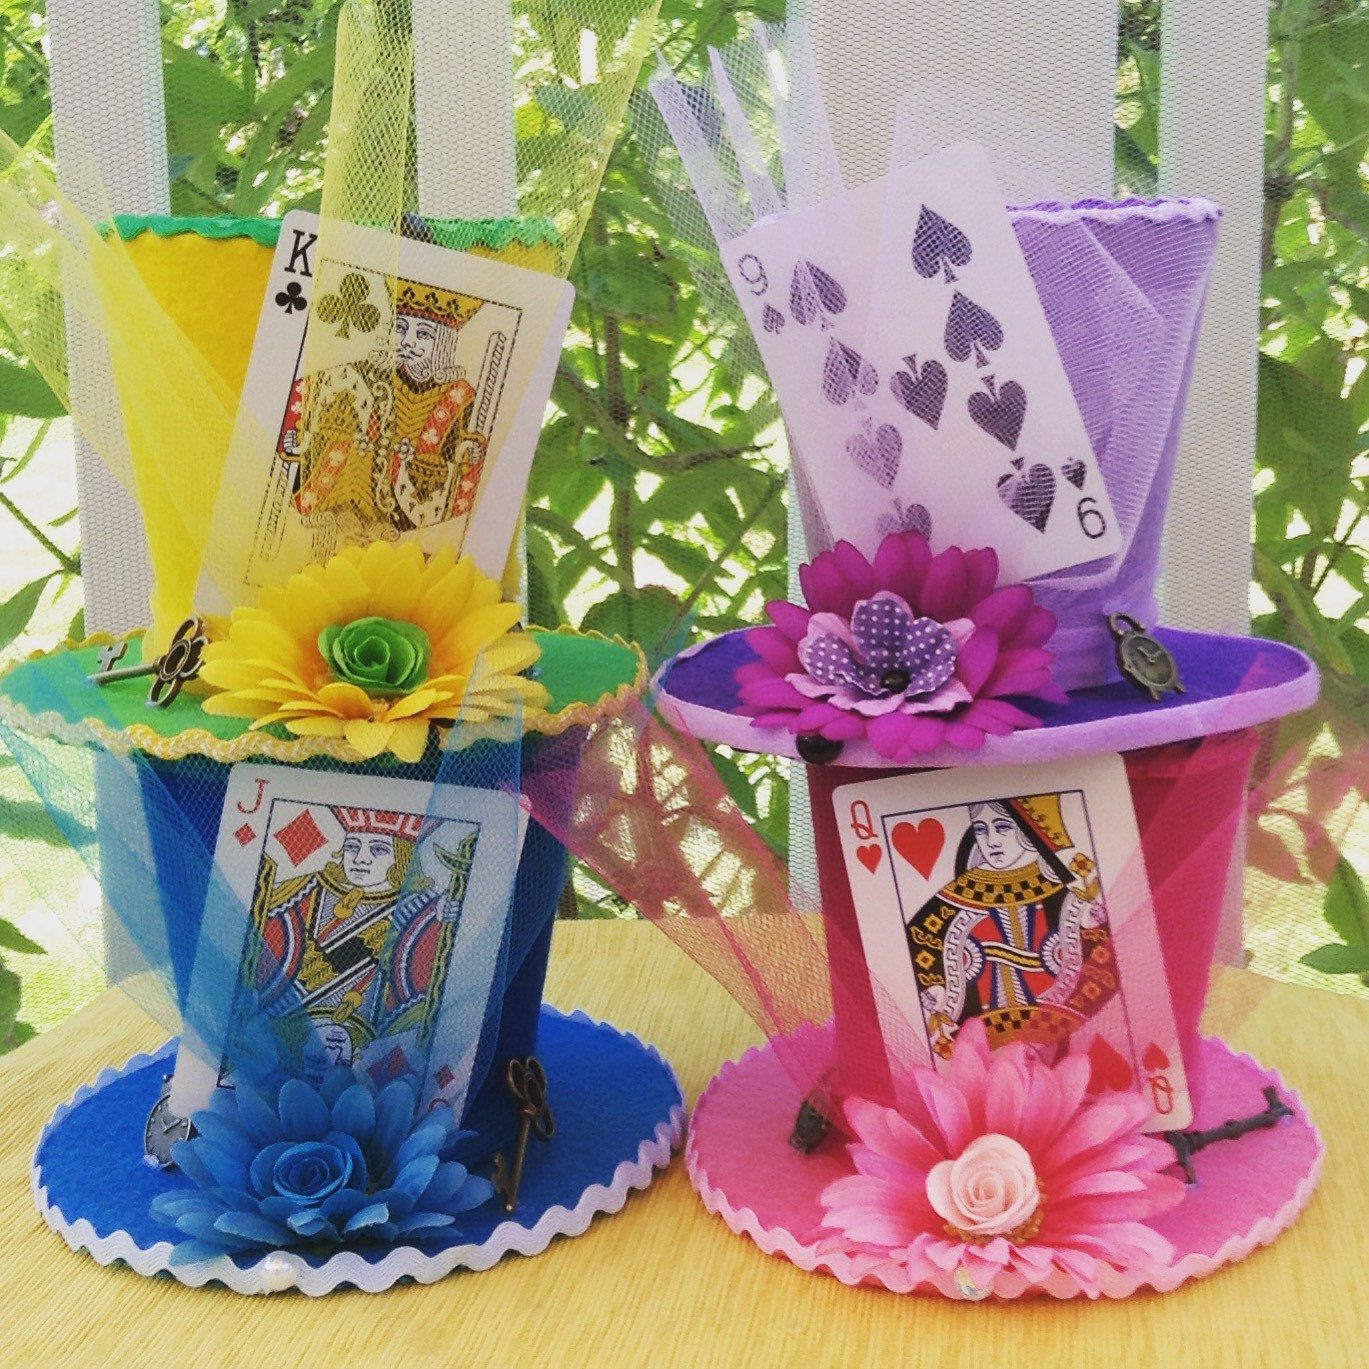 Mad Hatter Tea Party Hats Ideas
 Mad Hatter Tea Party Decorations Set of 4 Alice in